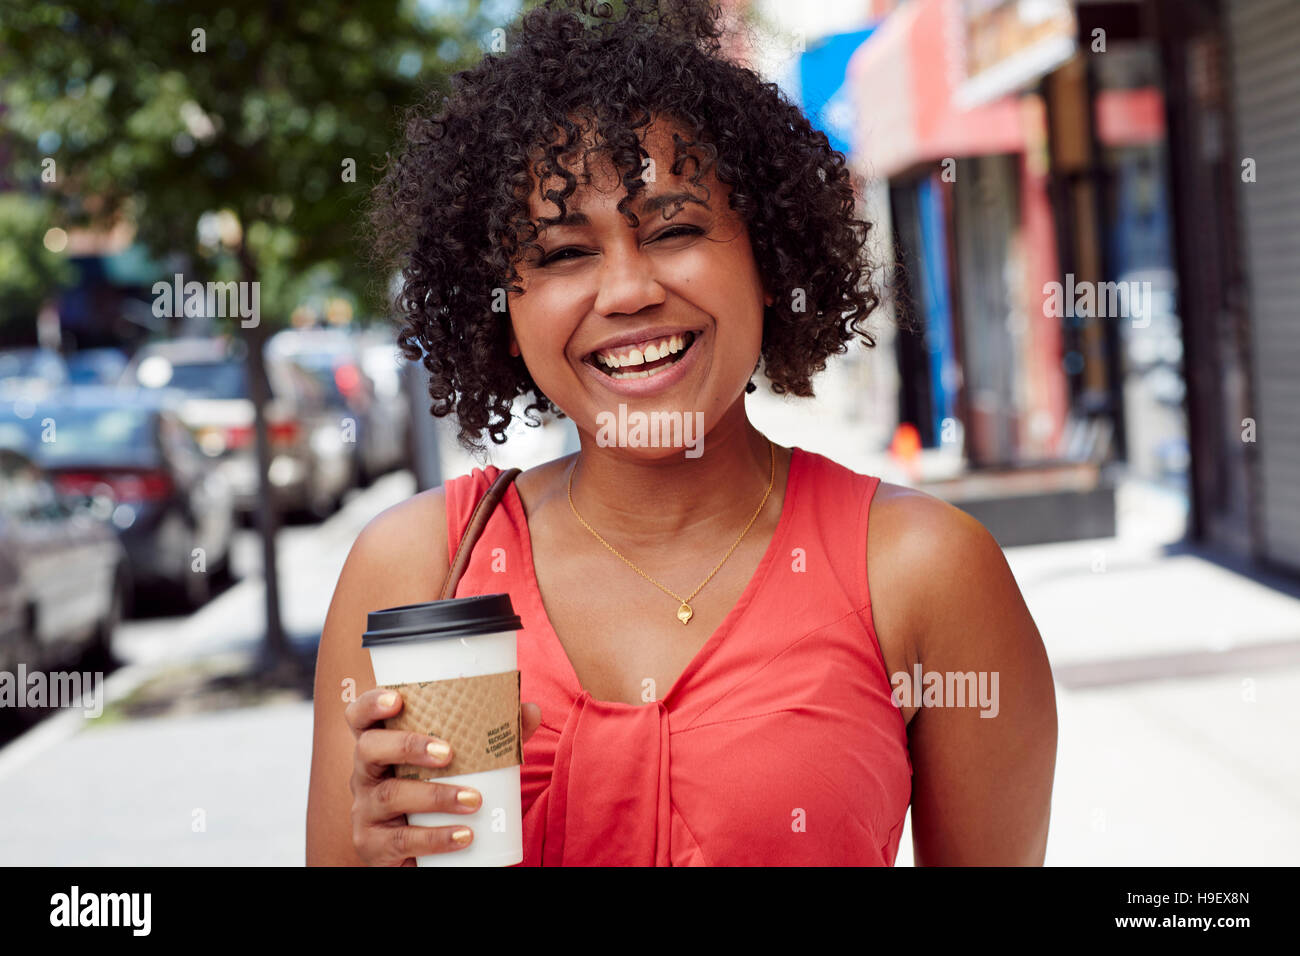 Smiling woman carrying coffee on city sidewalk Stock Photo